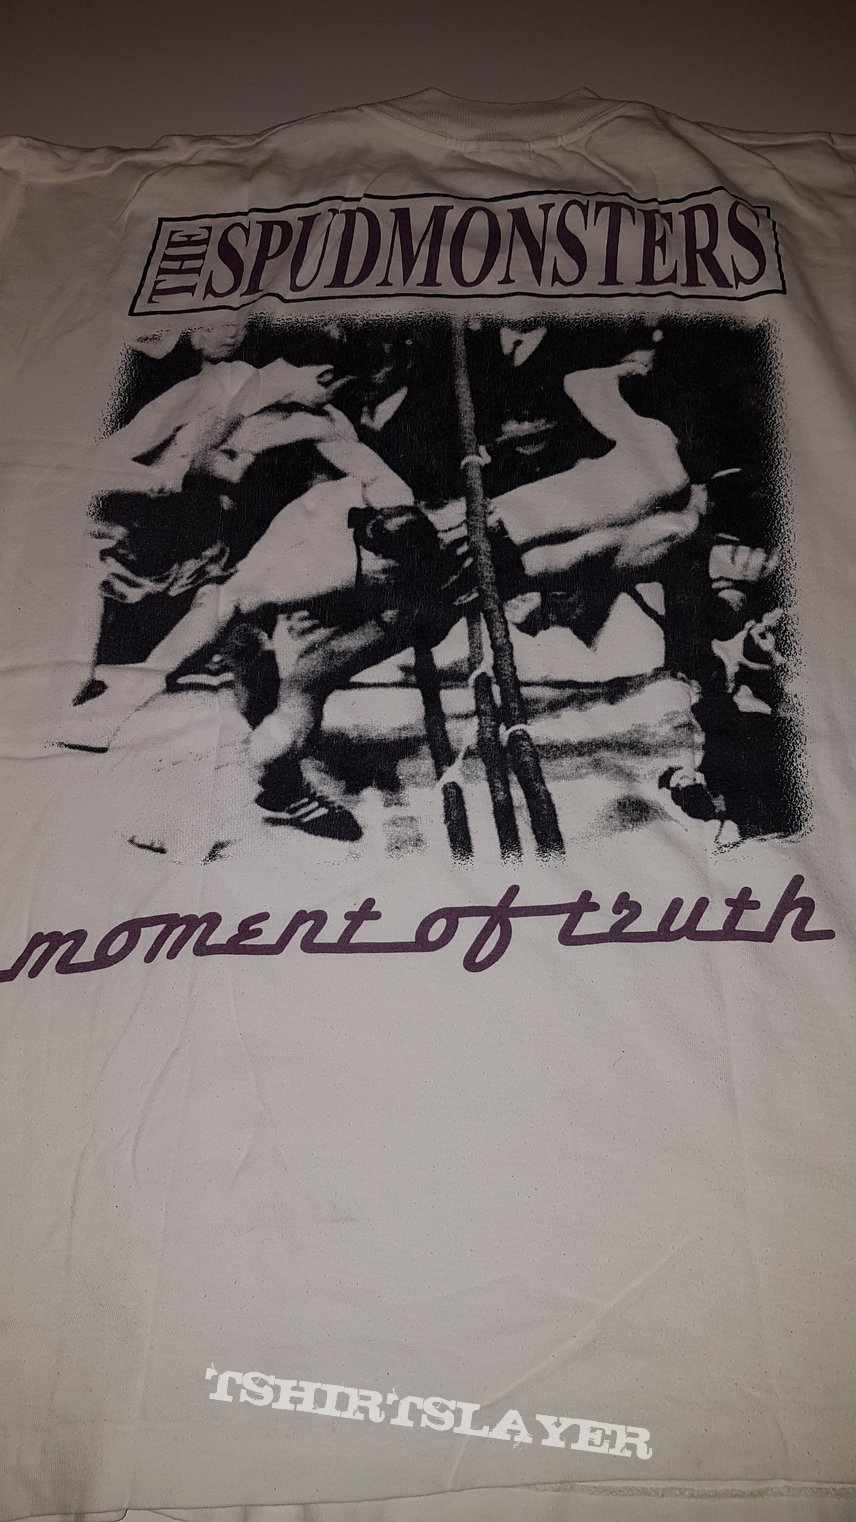 The spudmonsters; Moment of truth shirt 1996